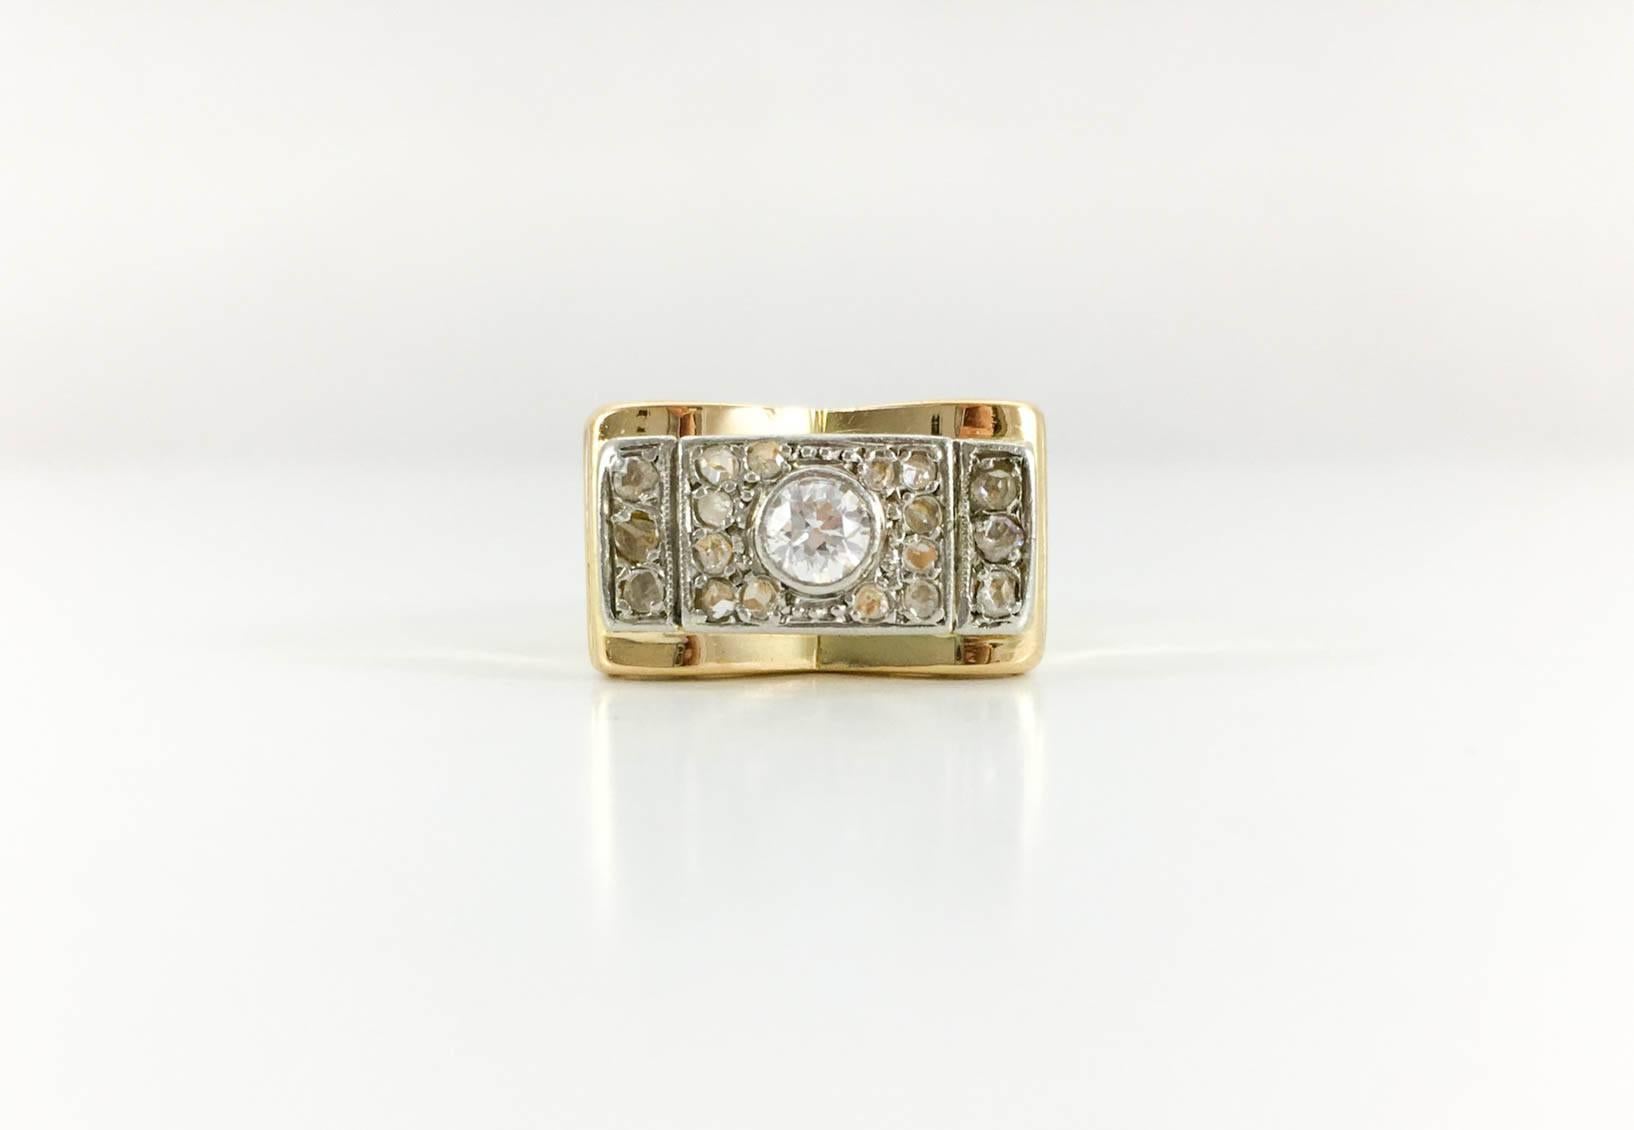 Gold and Diamond Cocktail Ring - 1940s In Excellent Condition For Sale In London, Chelsea